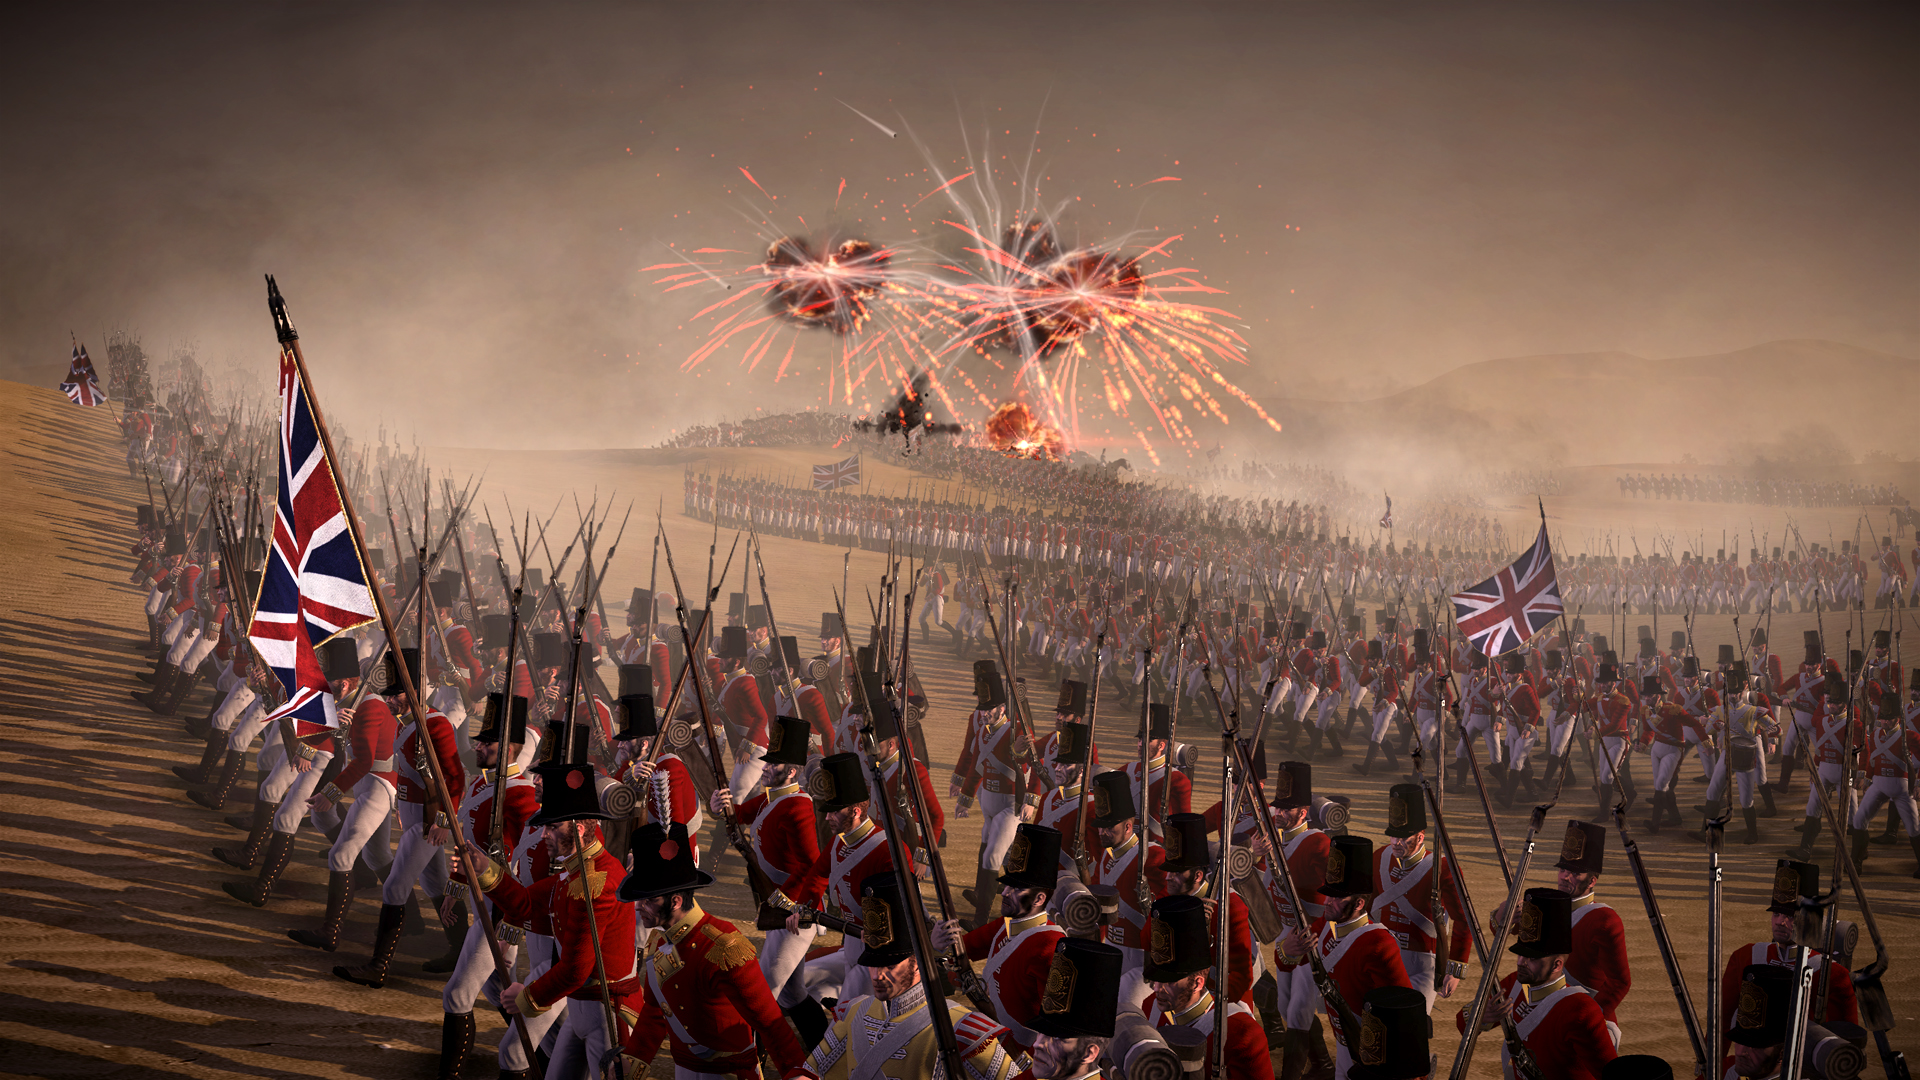  2015 By Stephen Comments Off on Napoleon Total War Wallpapers